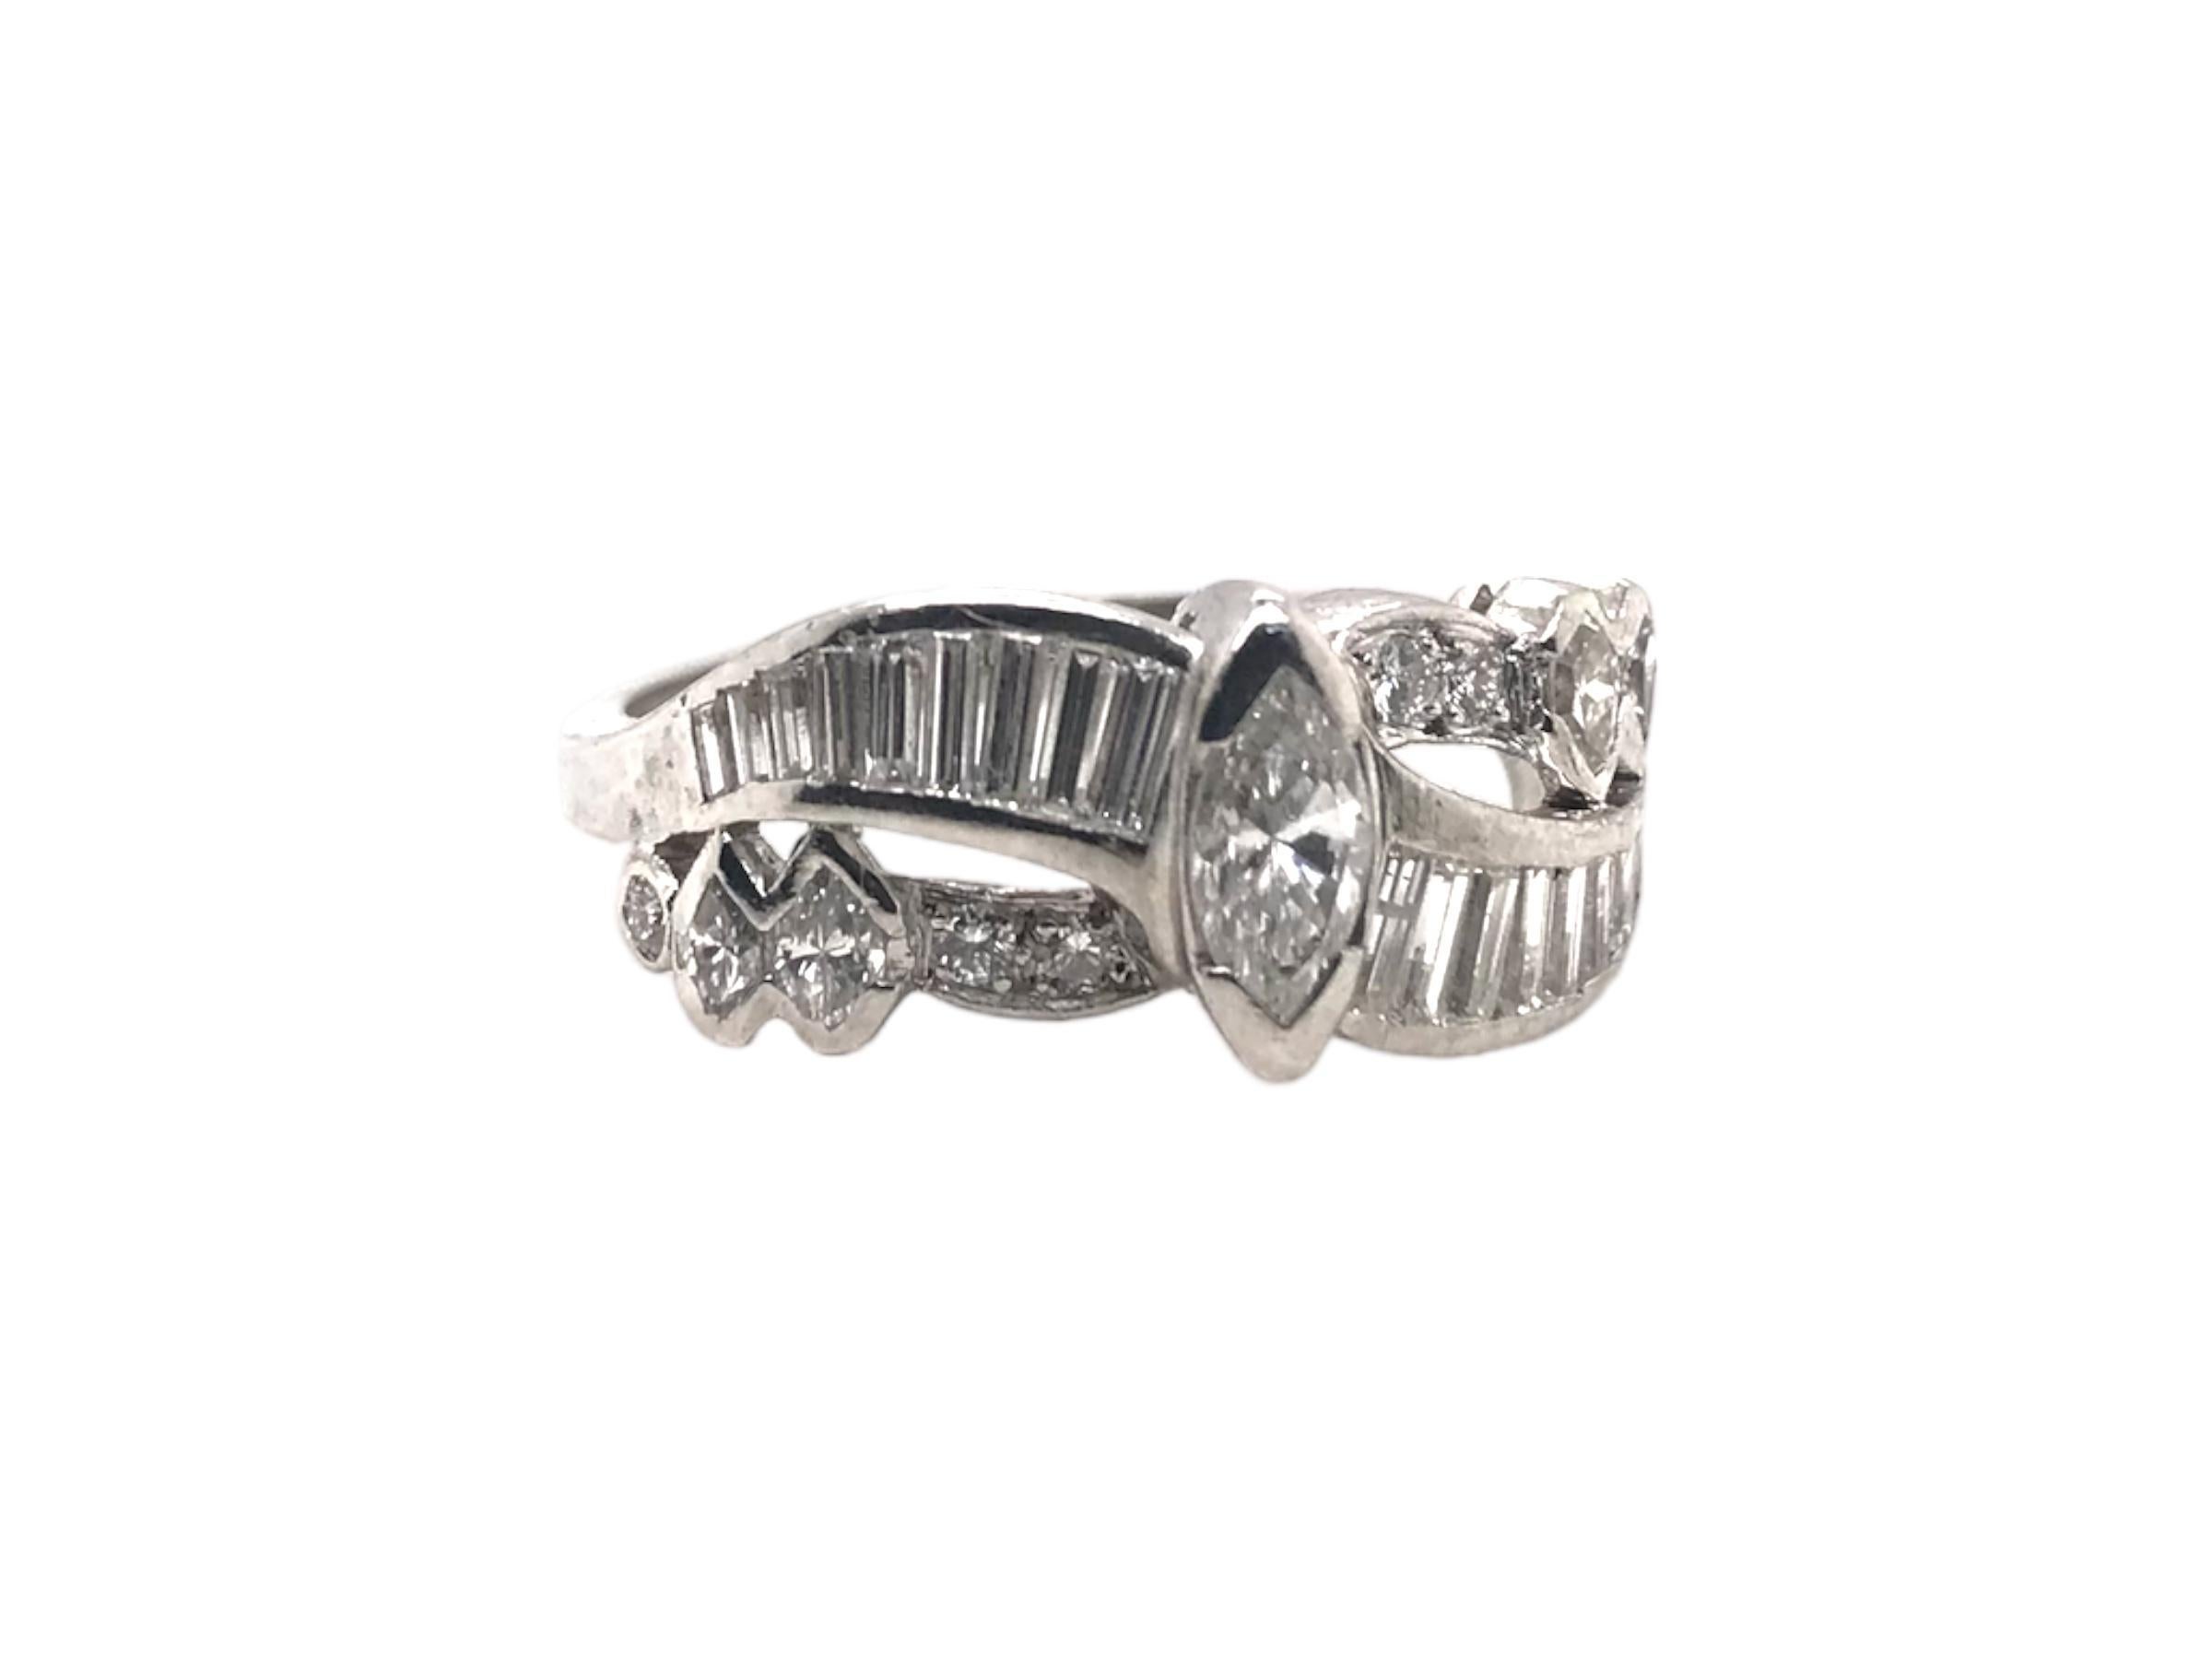 We love well done retro pieces such as this!
Exceptional use of different diamond cuts to make a stunning piece.

Ring Details
Era: Retro 1940 - 1960
Width: 9.0mm
Shank Width: 2.0mm
Weight: 6.5 Grams
Finger Size: 7 1/4 
Sizing Available Upon